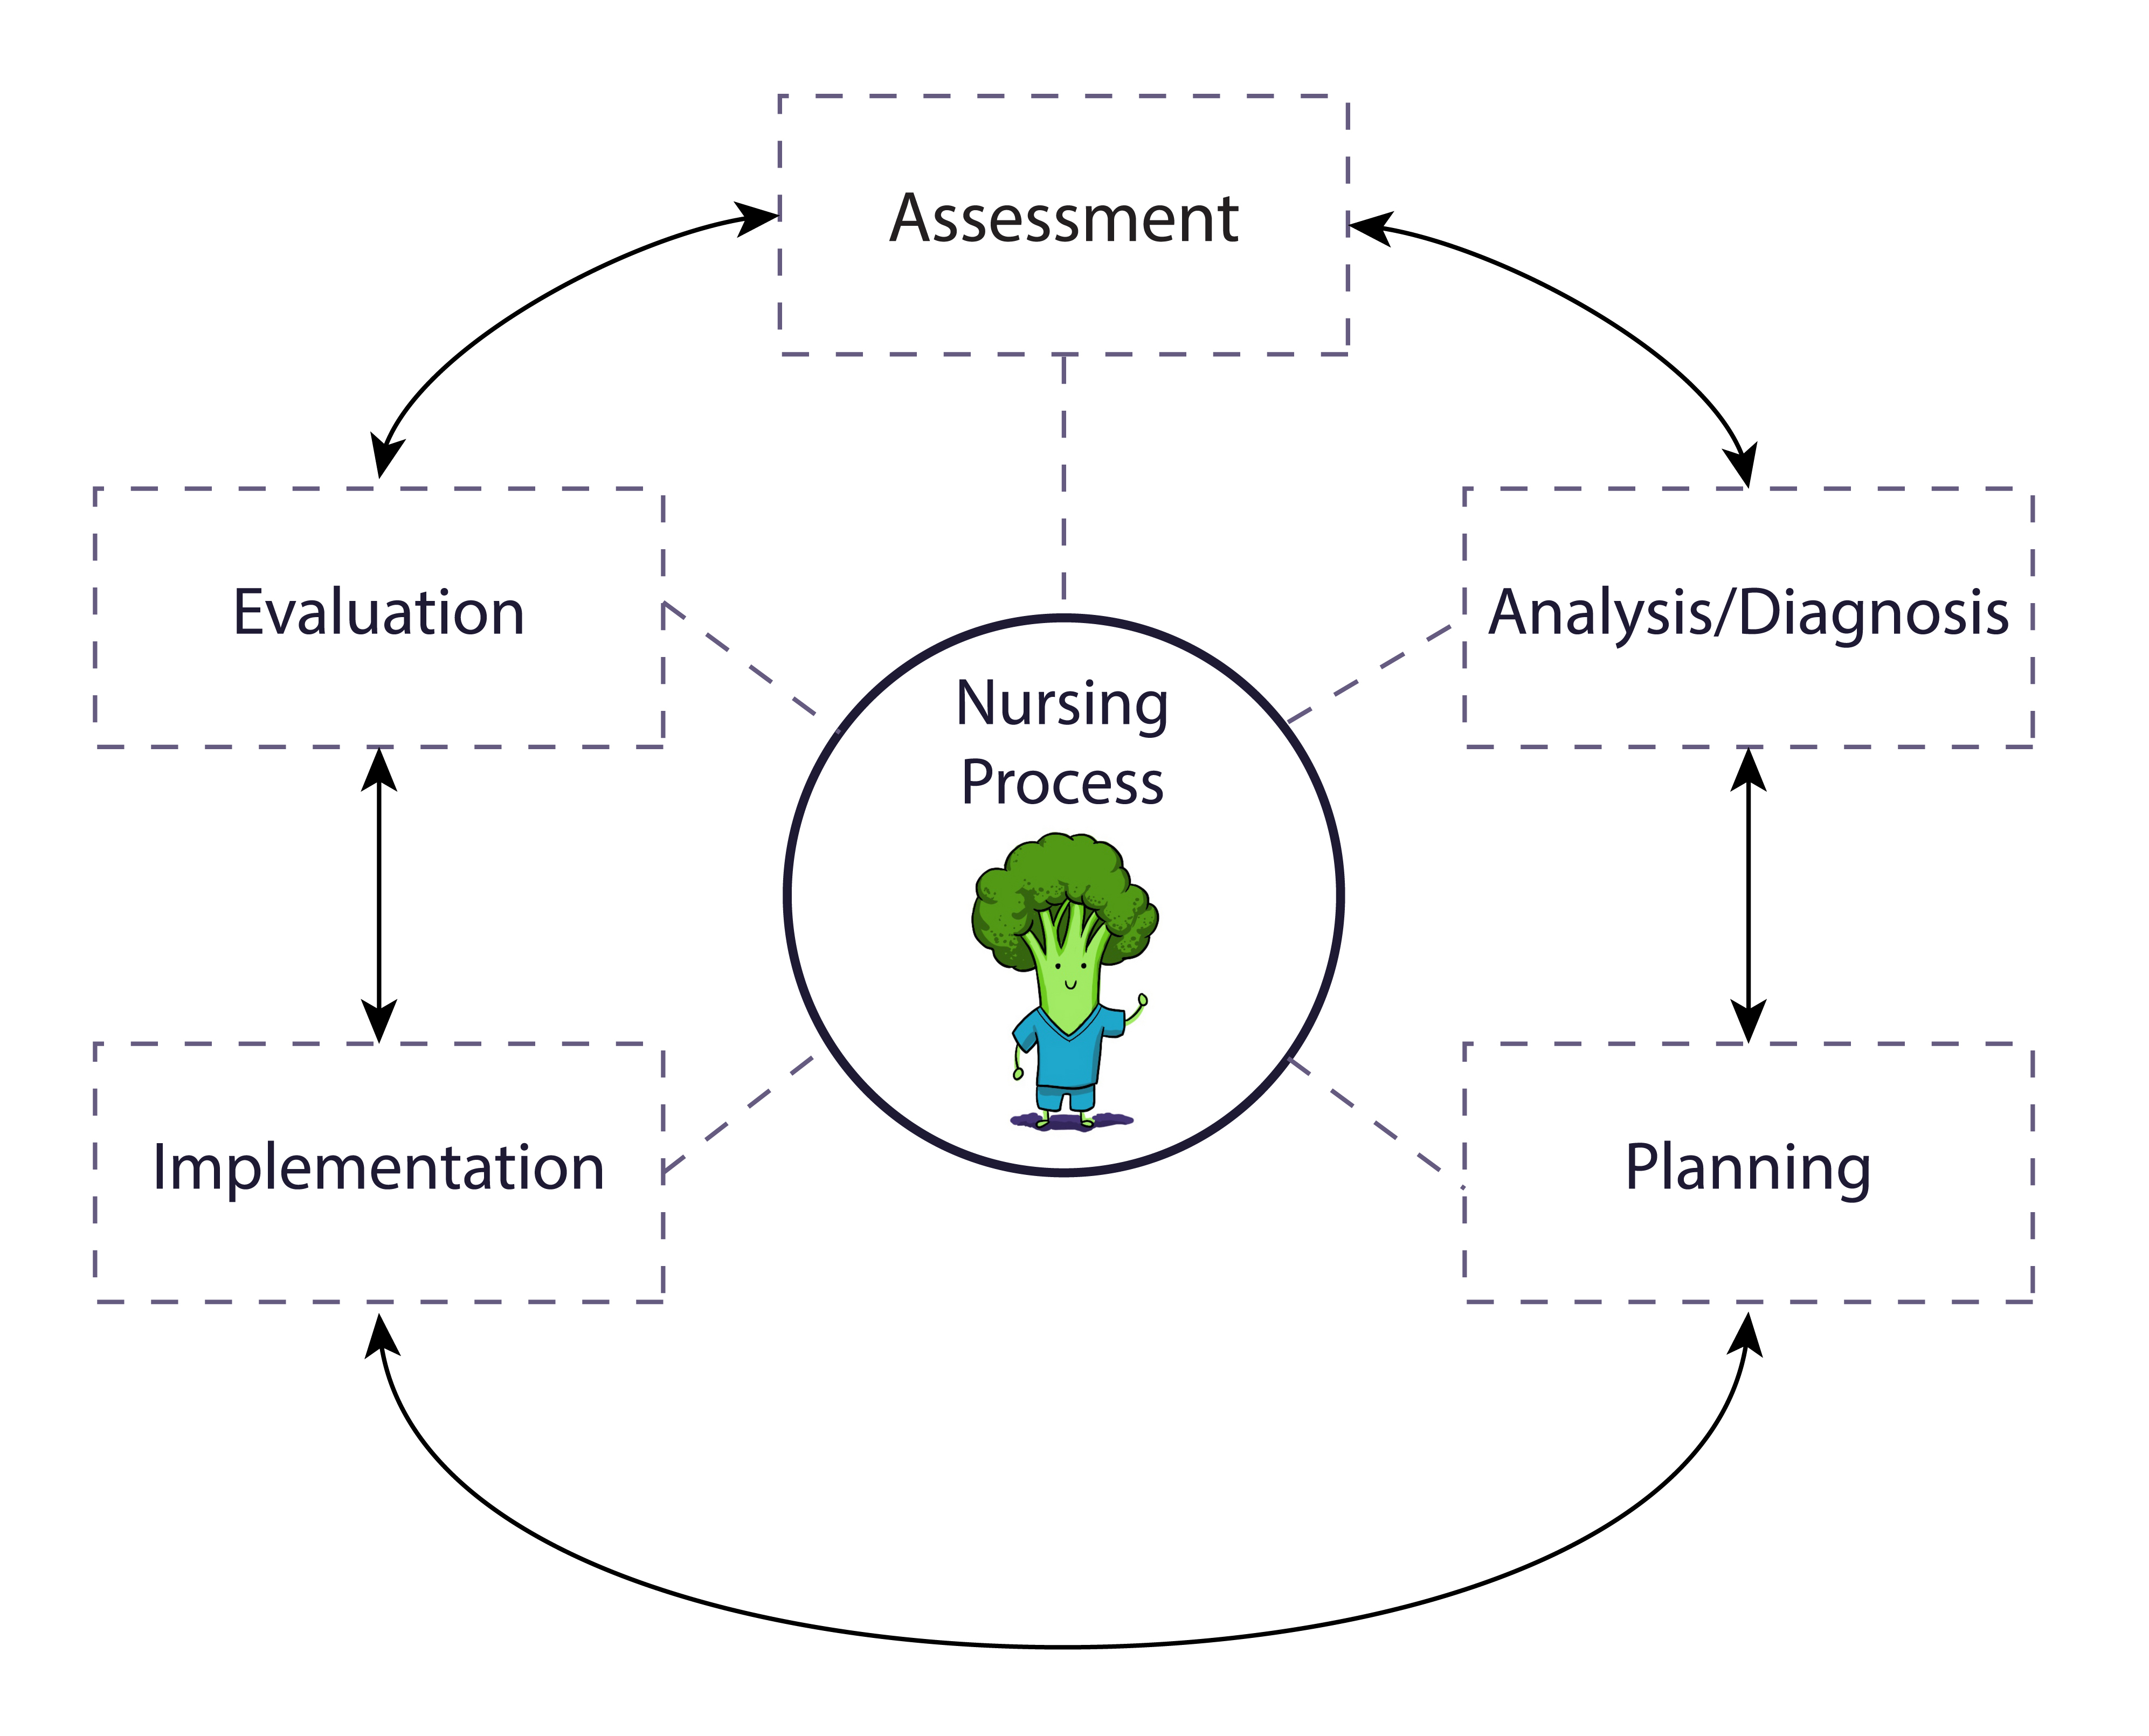 The nursing process, moving in a cycle that covers: analysis/diagnosis, planning, implementation, evaluation, and assessment